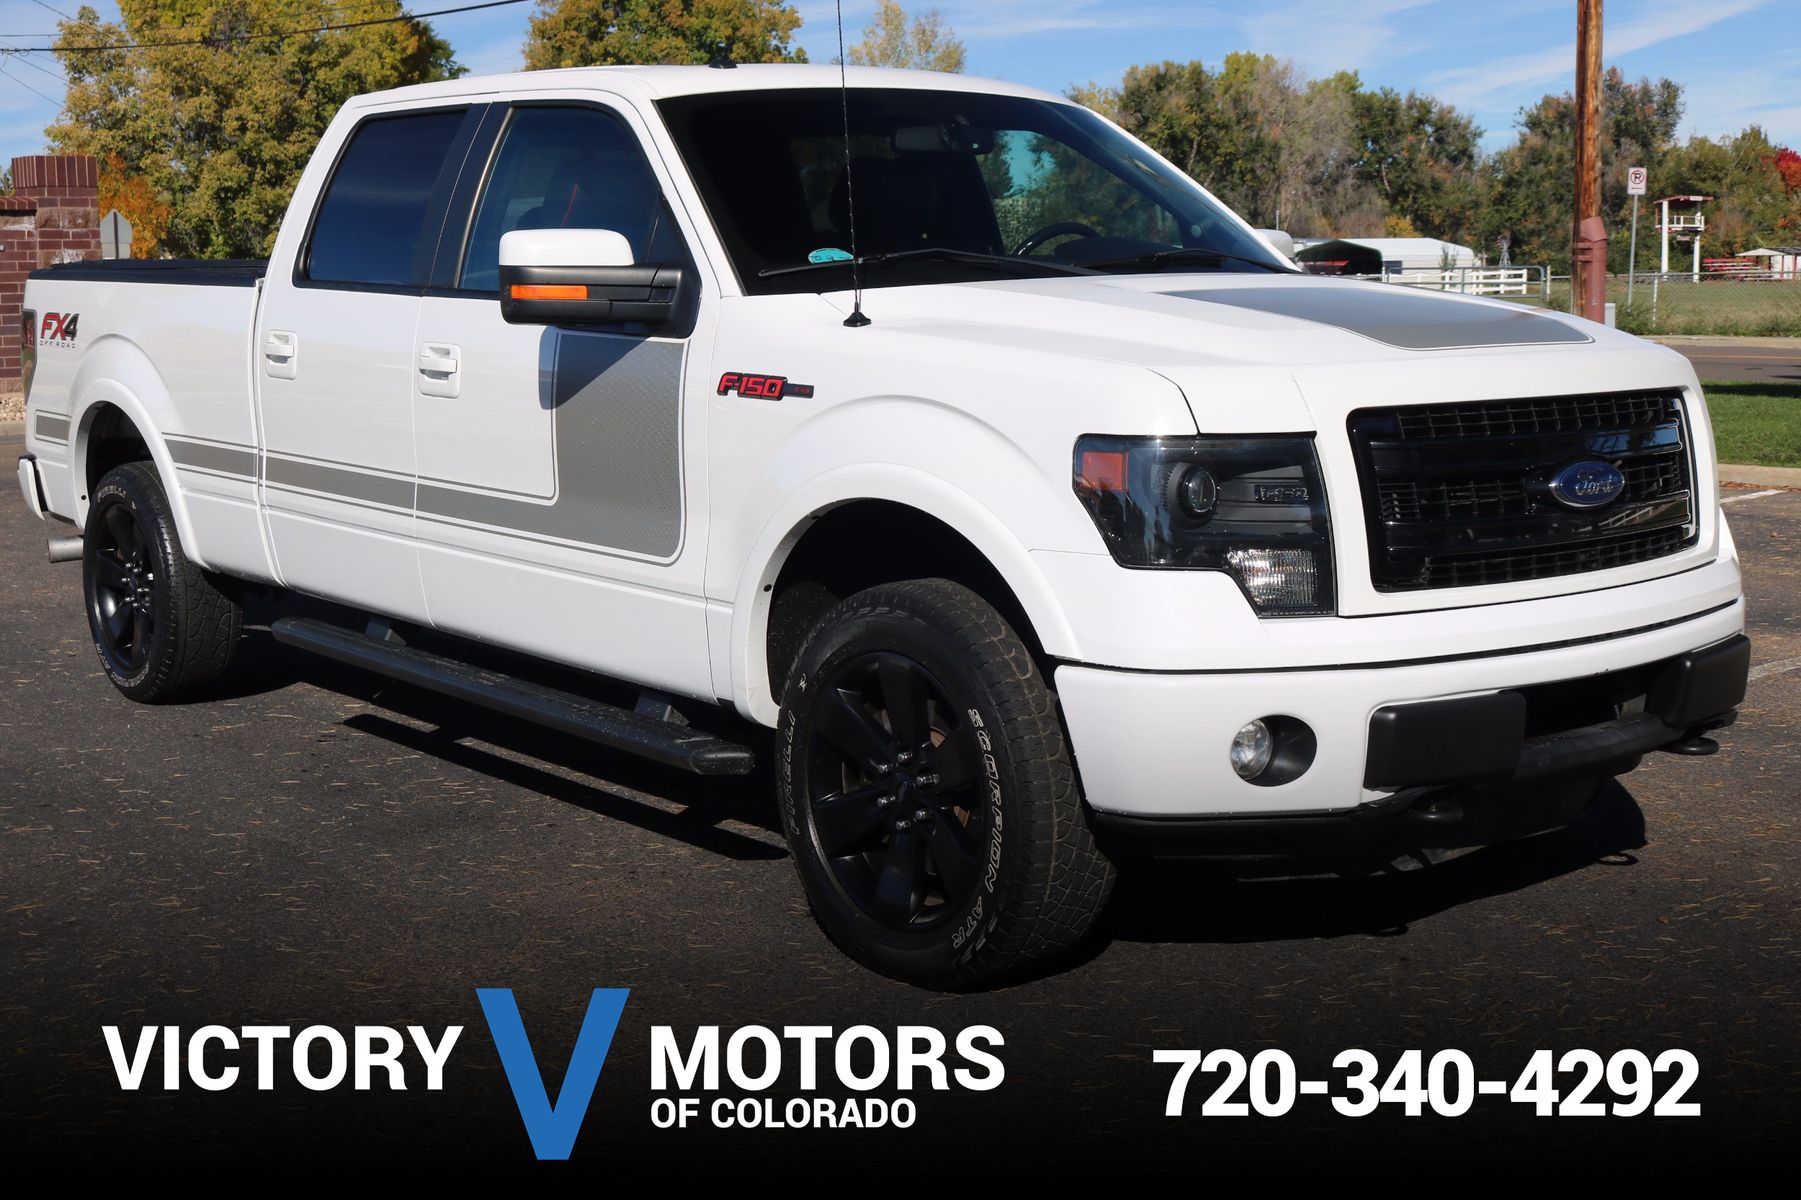 2013 Ford F-150 FX4 | Victory Motors of Colorado 2013 Ford F 150 Fx4 5.0 Towing Capacity